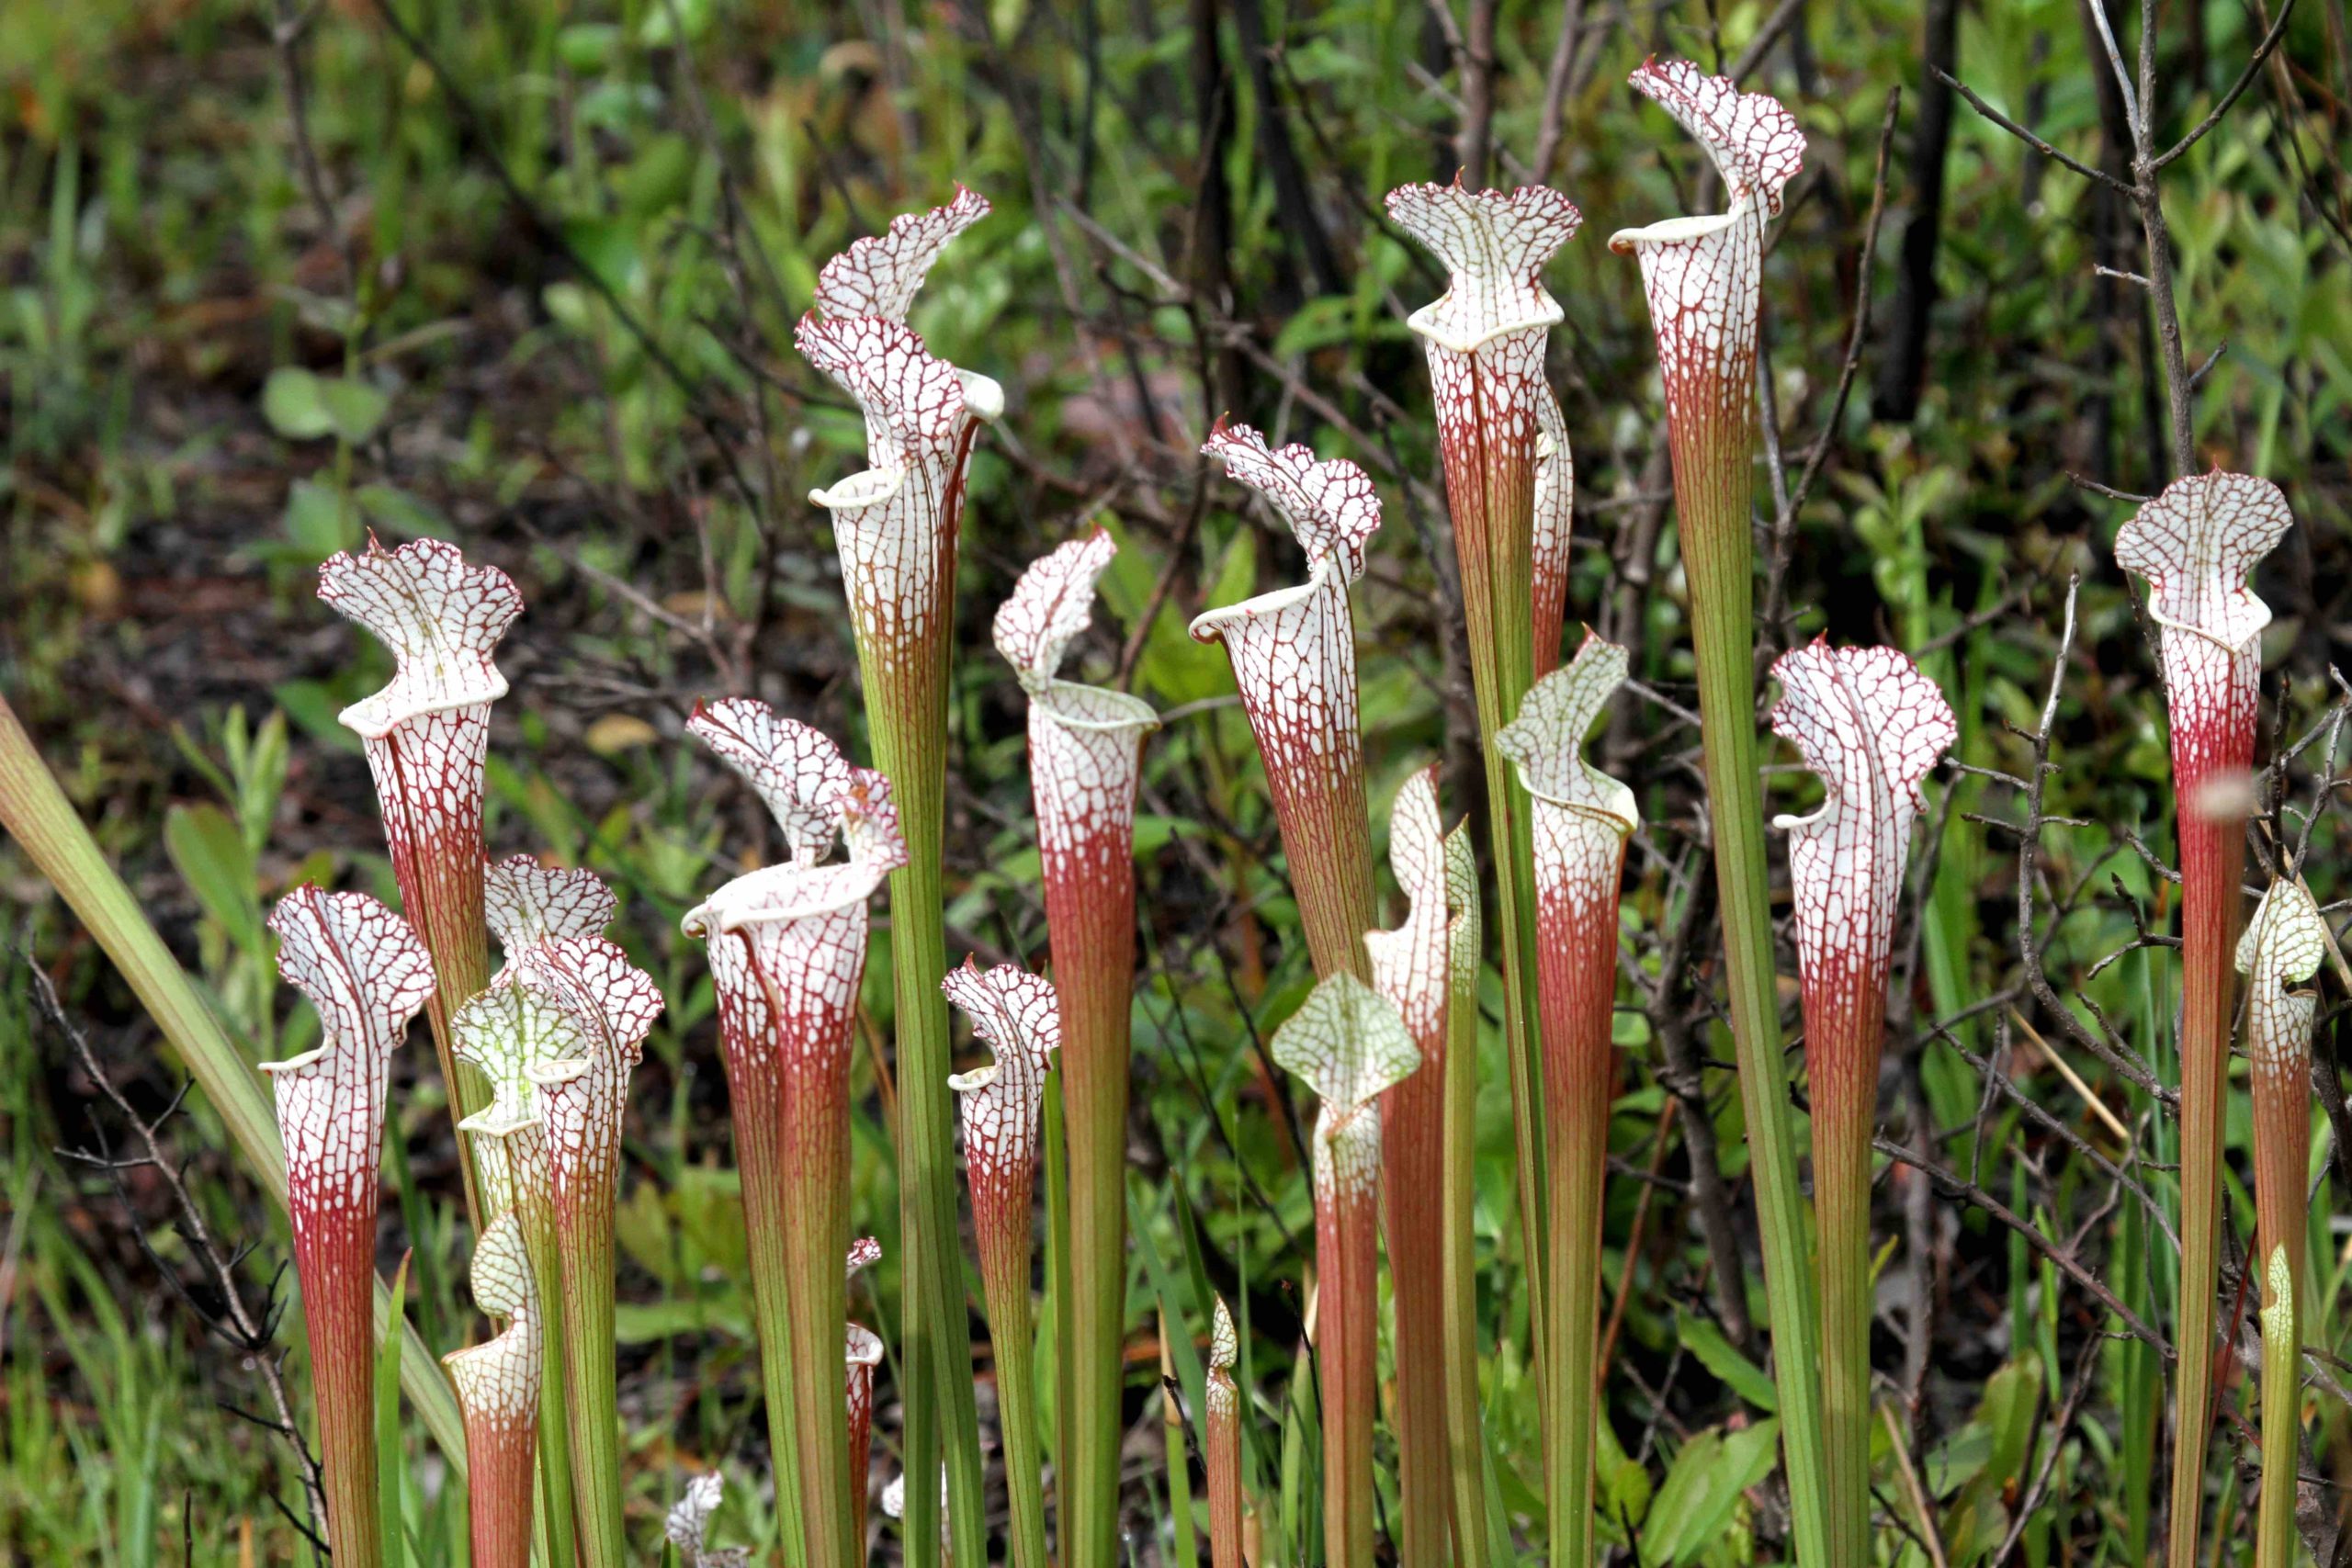 US travel to Mobile, AL may turn up a White-Topped Pitcher Plant